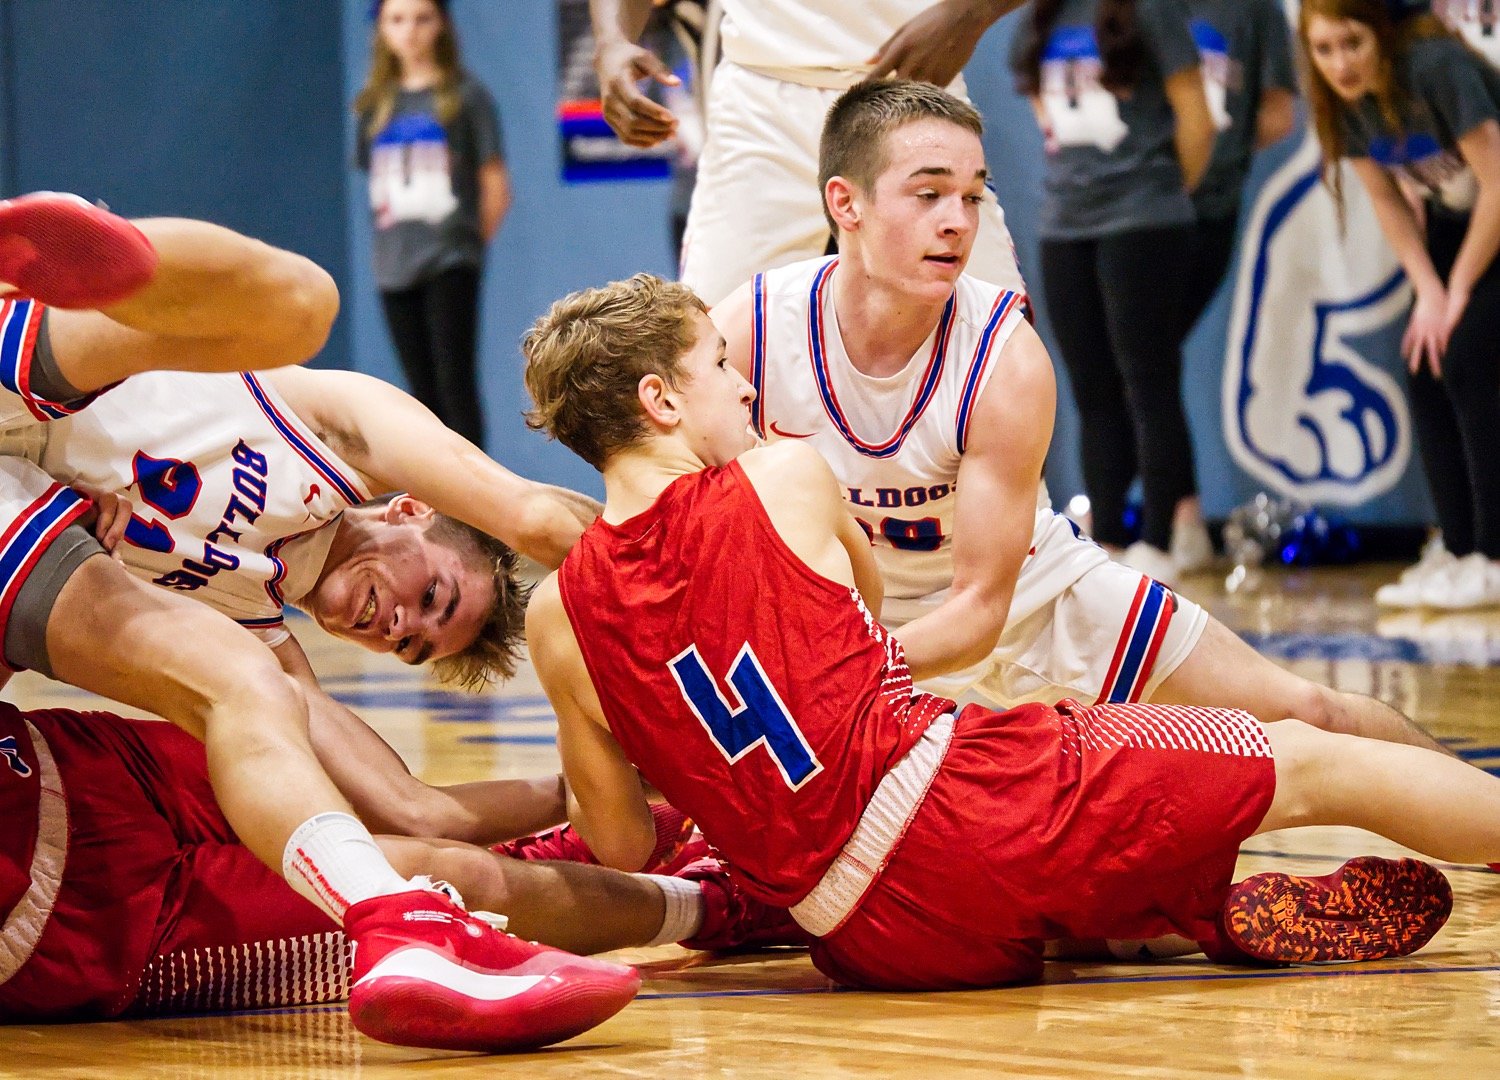 Ben Burroughs and Ford Tannebaum of Quitman and Will Hartin of Alba-Golden tussle for a loose ball in last week’s cross-county district rivalry.